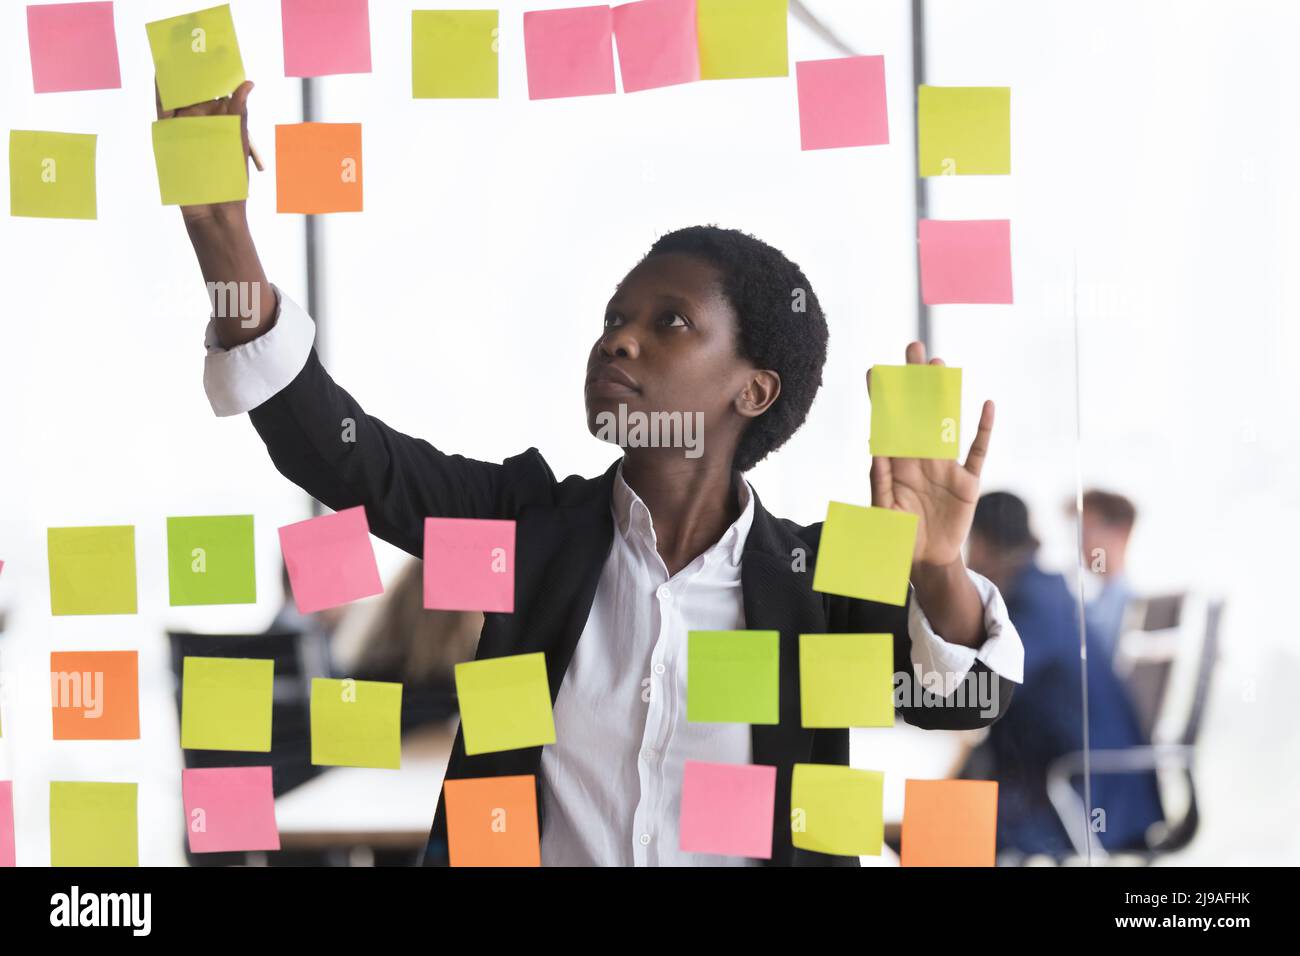 African businesslady jotting on adhesive stickers attached on glass wall Stock Photo